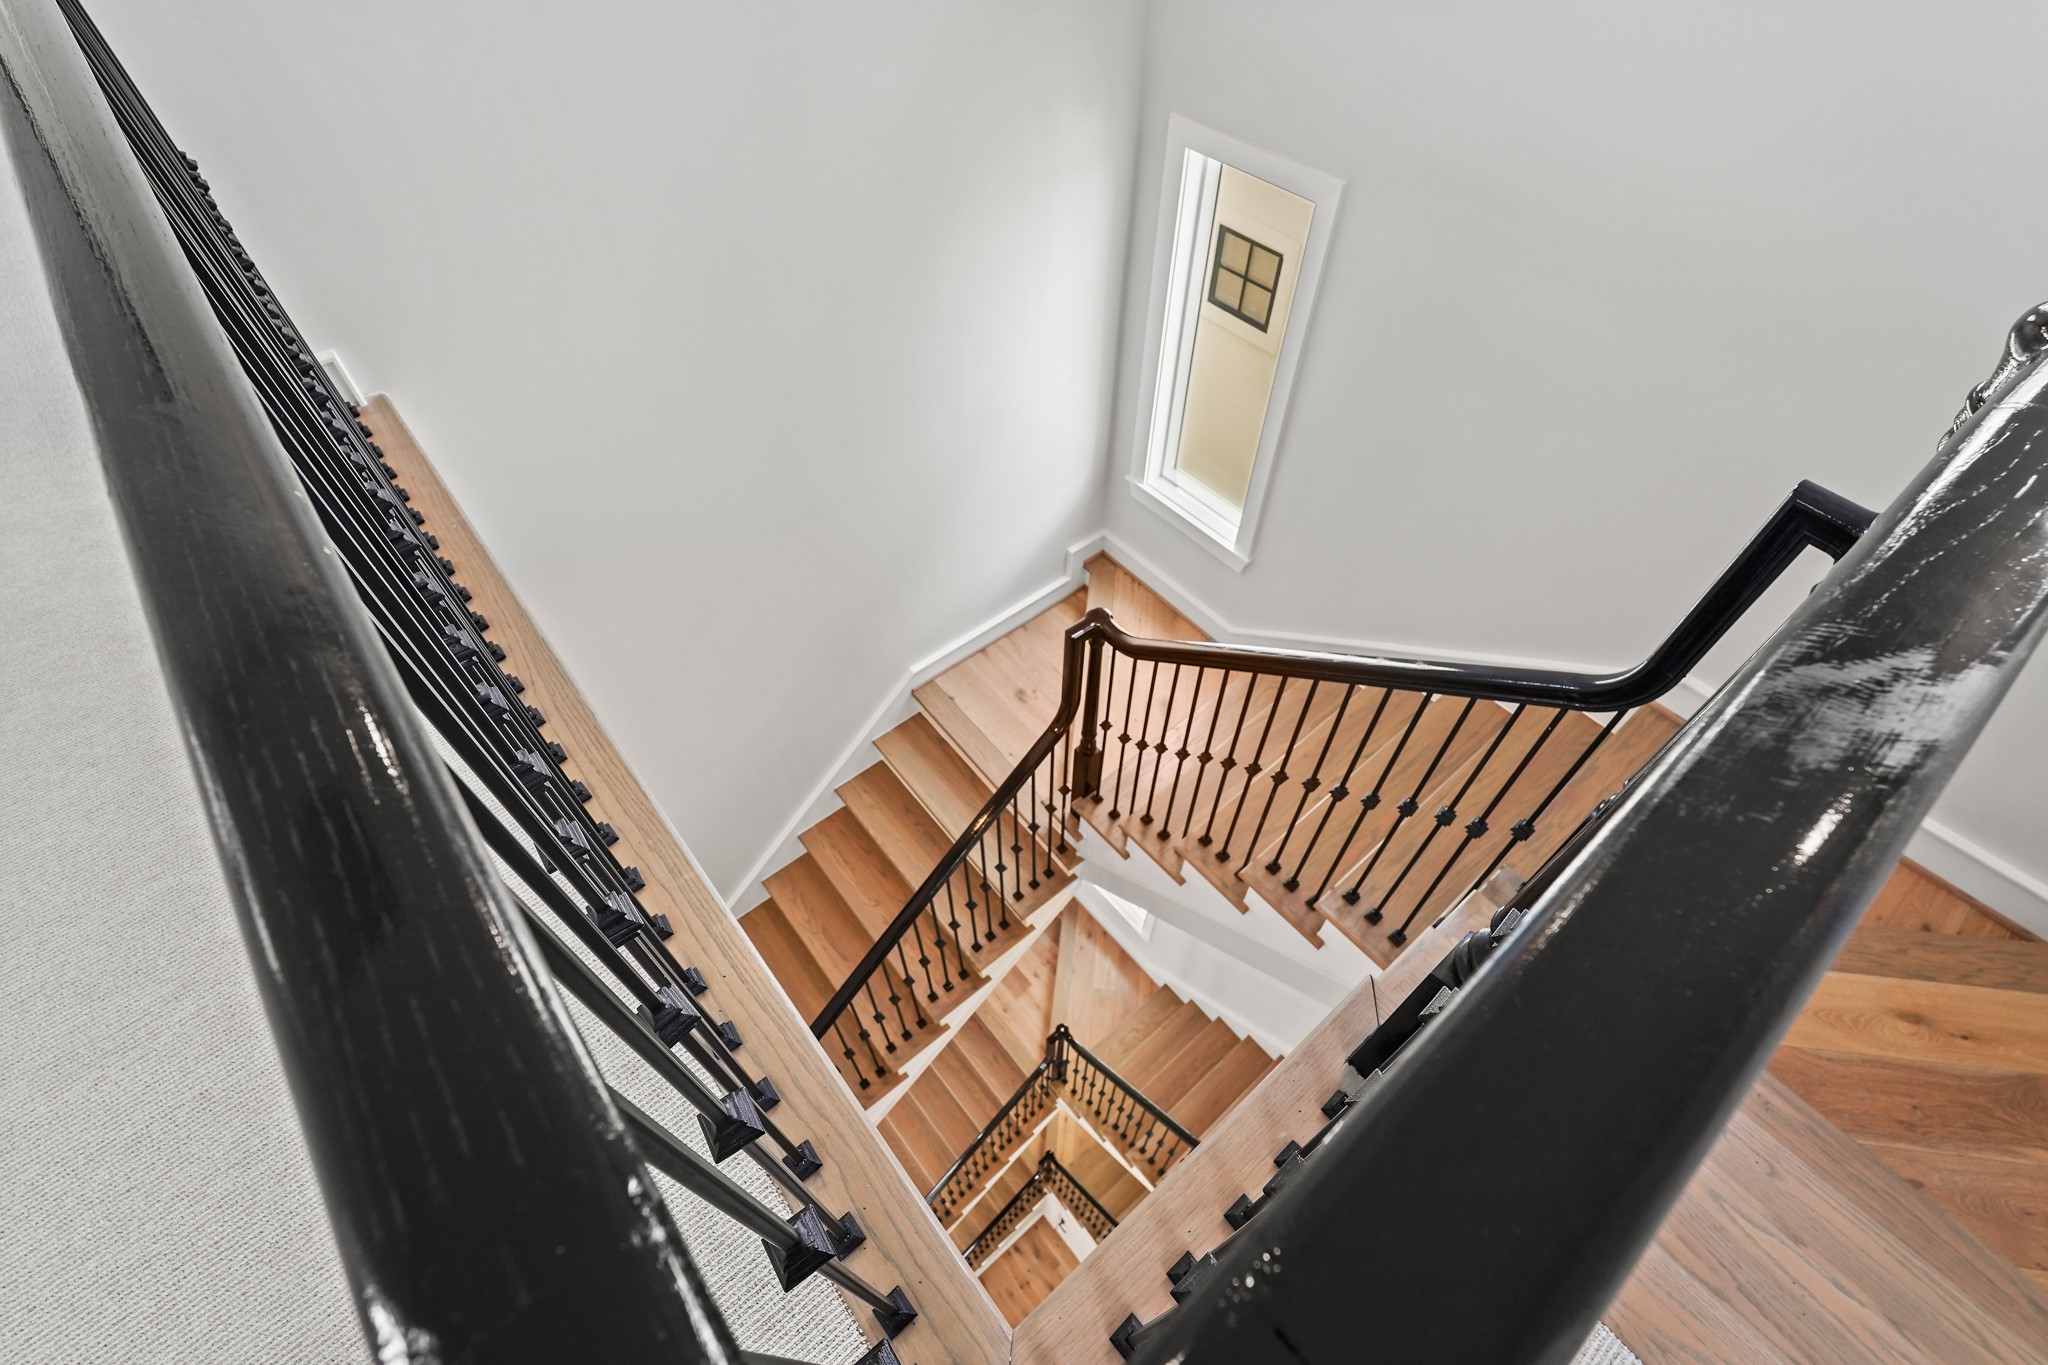 Your Dramatic Open Staircase is Gorgeously Contrasted By Hardwood Warmth & Timeless Espresso Colored Railing & Spindles